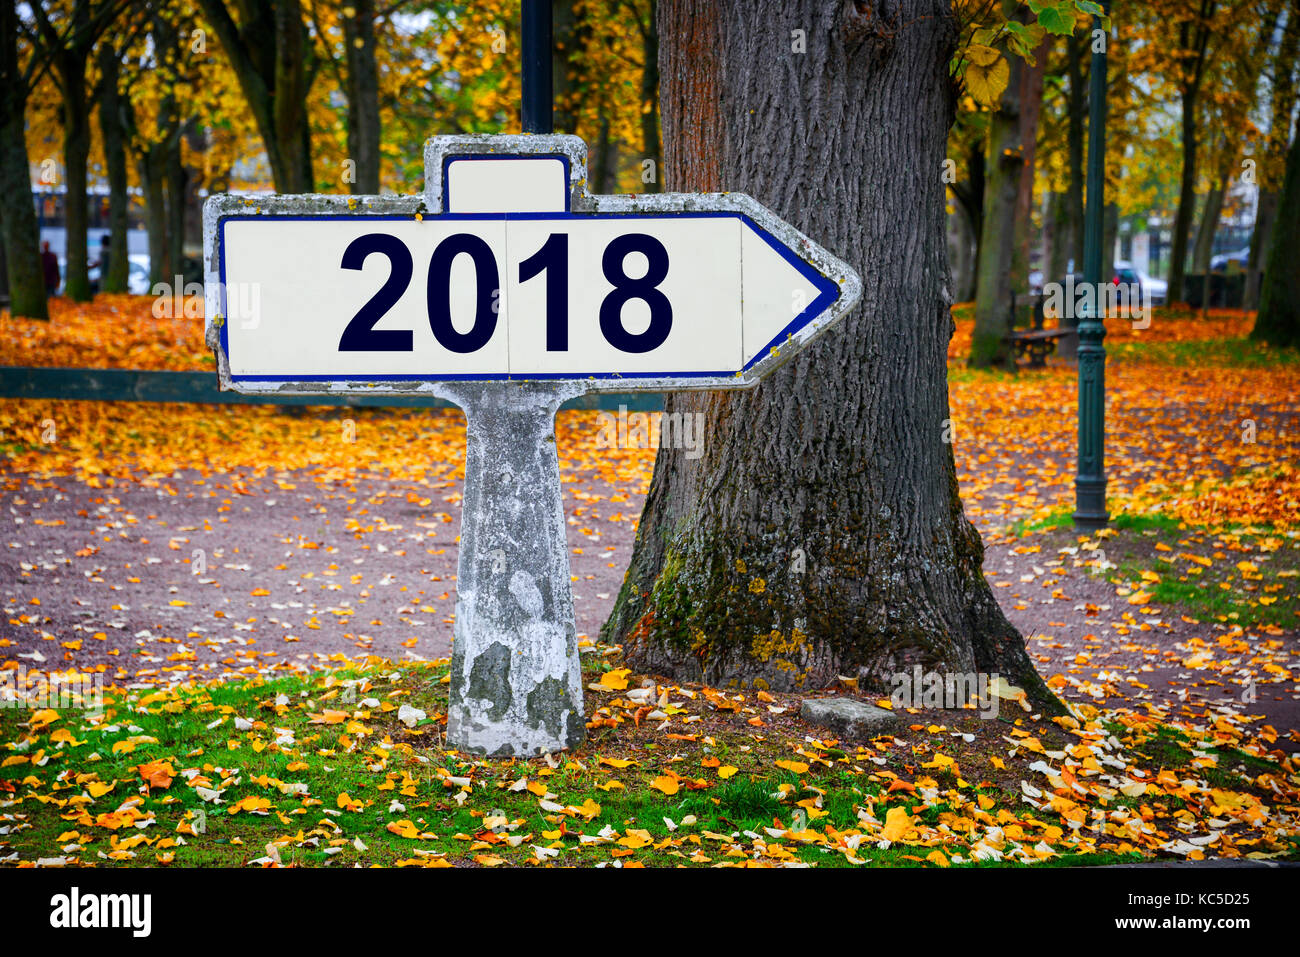 2018 written on an old french roadsign, autumn background Stock Photo